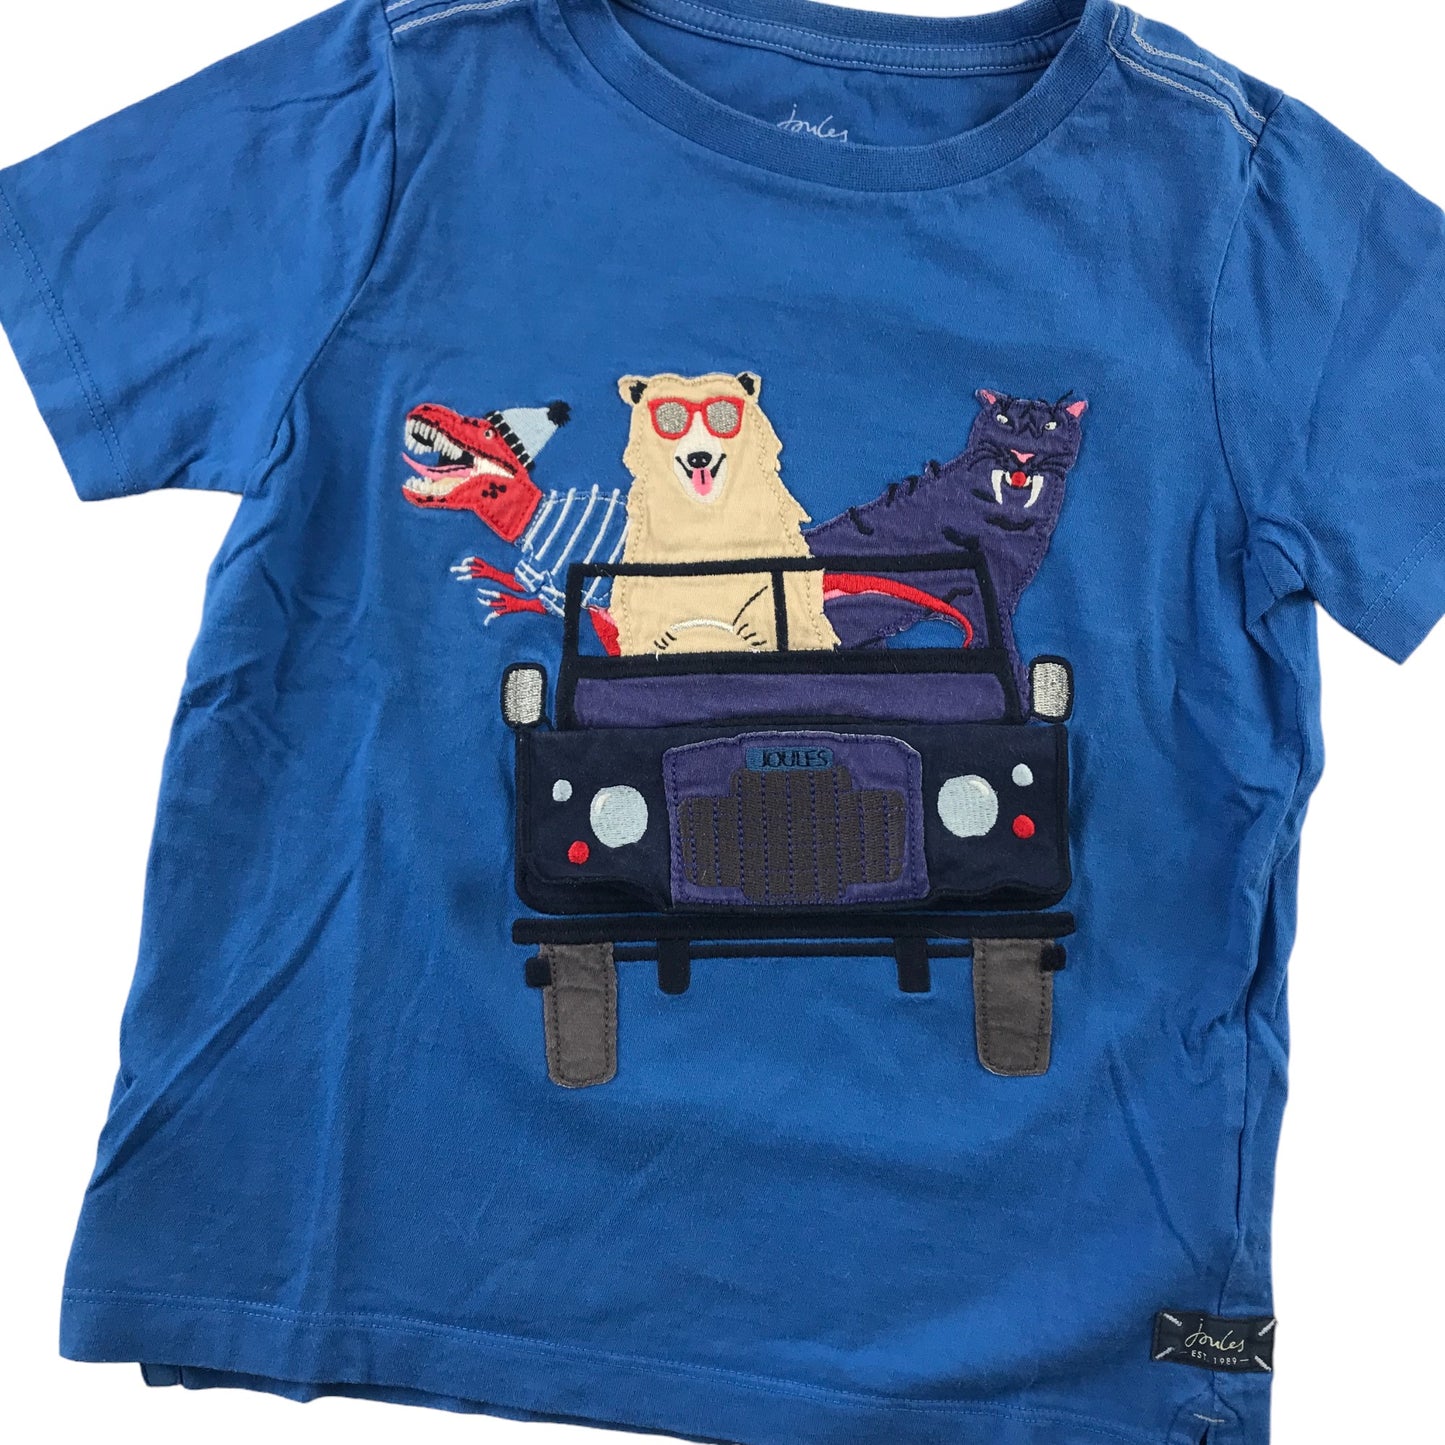 Joules T-shirt Age 6 Blue Embroidered Car and Animals